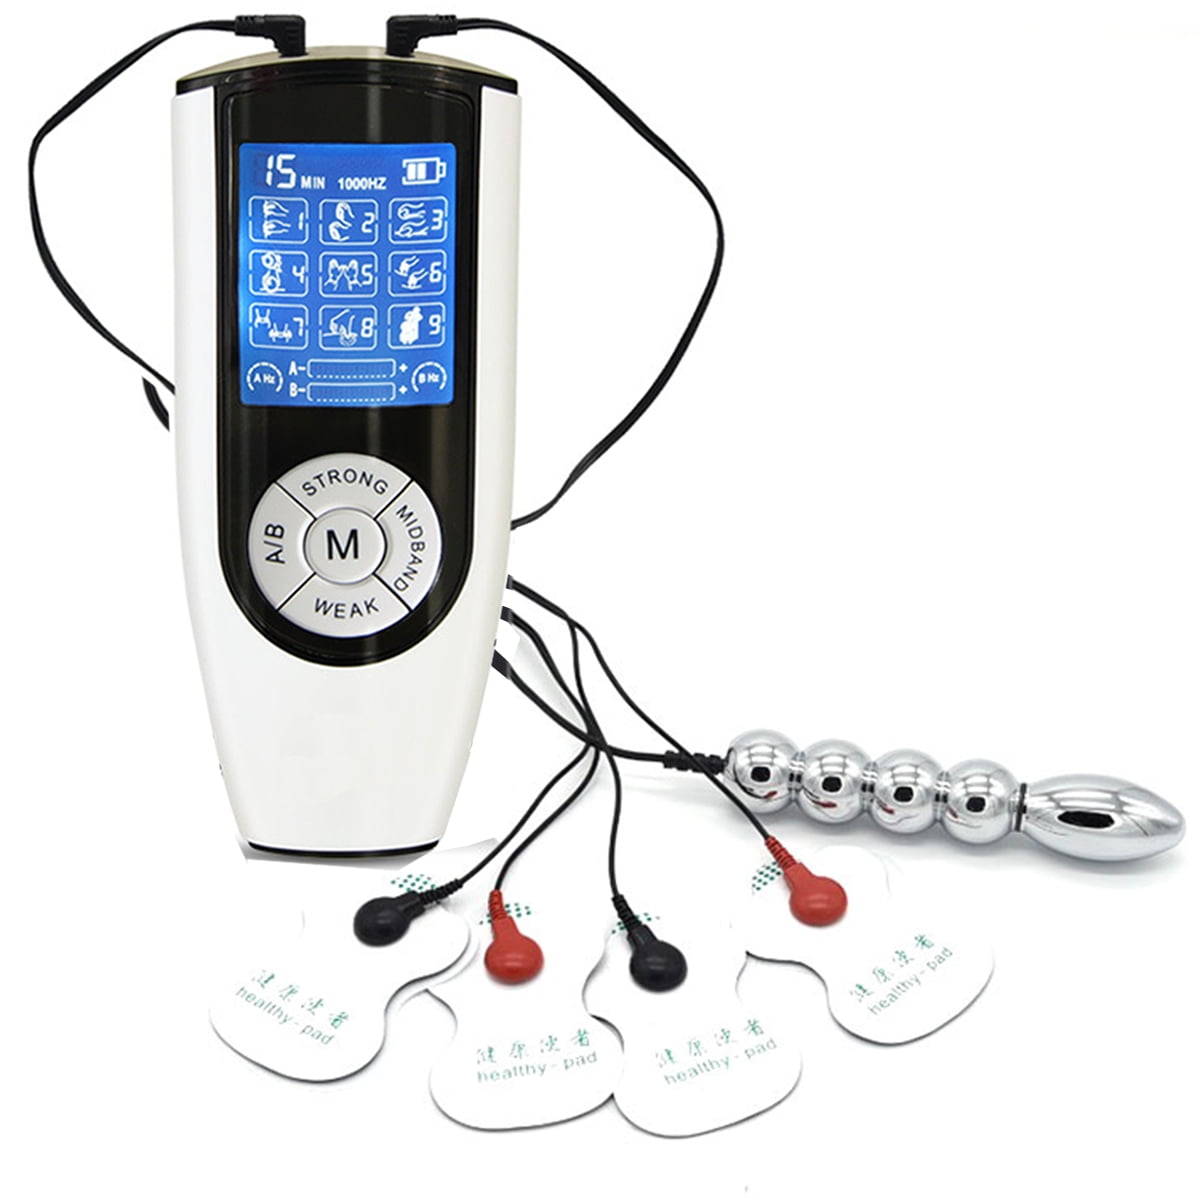 E-Stim Black Devices Te-ns Stim Electric Shock Accessories Massager Product Stimulator  Electro Unit 1 Power Box+1 DC2.5 Pin 2.0 Wires+4 Rings. 